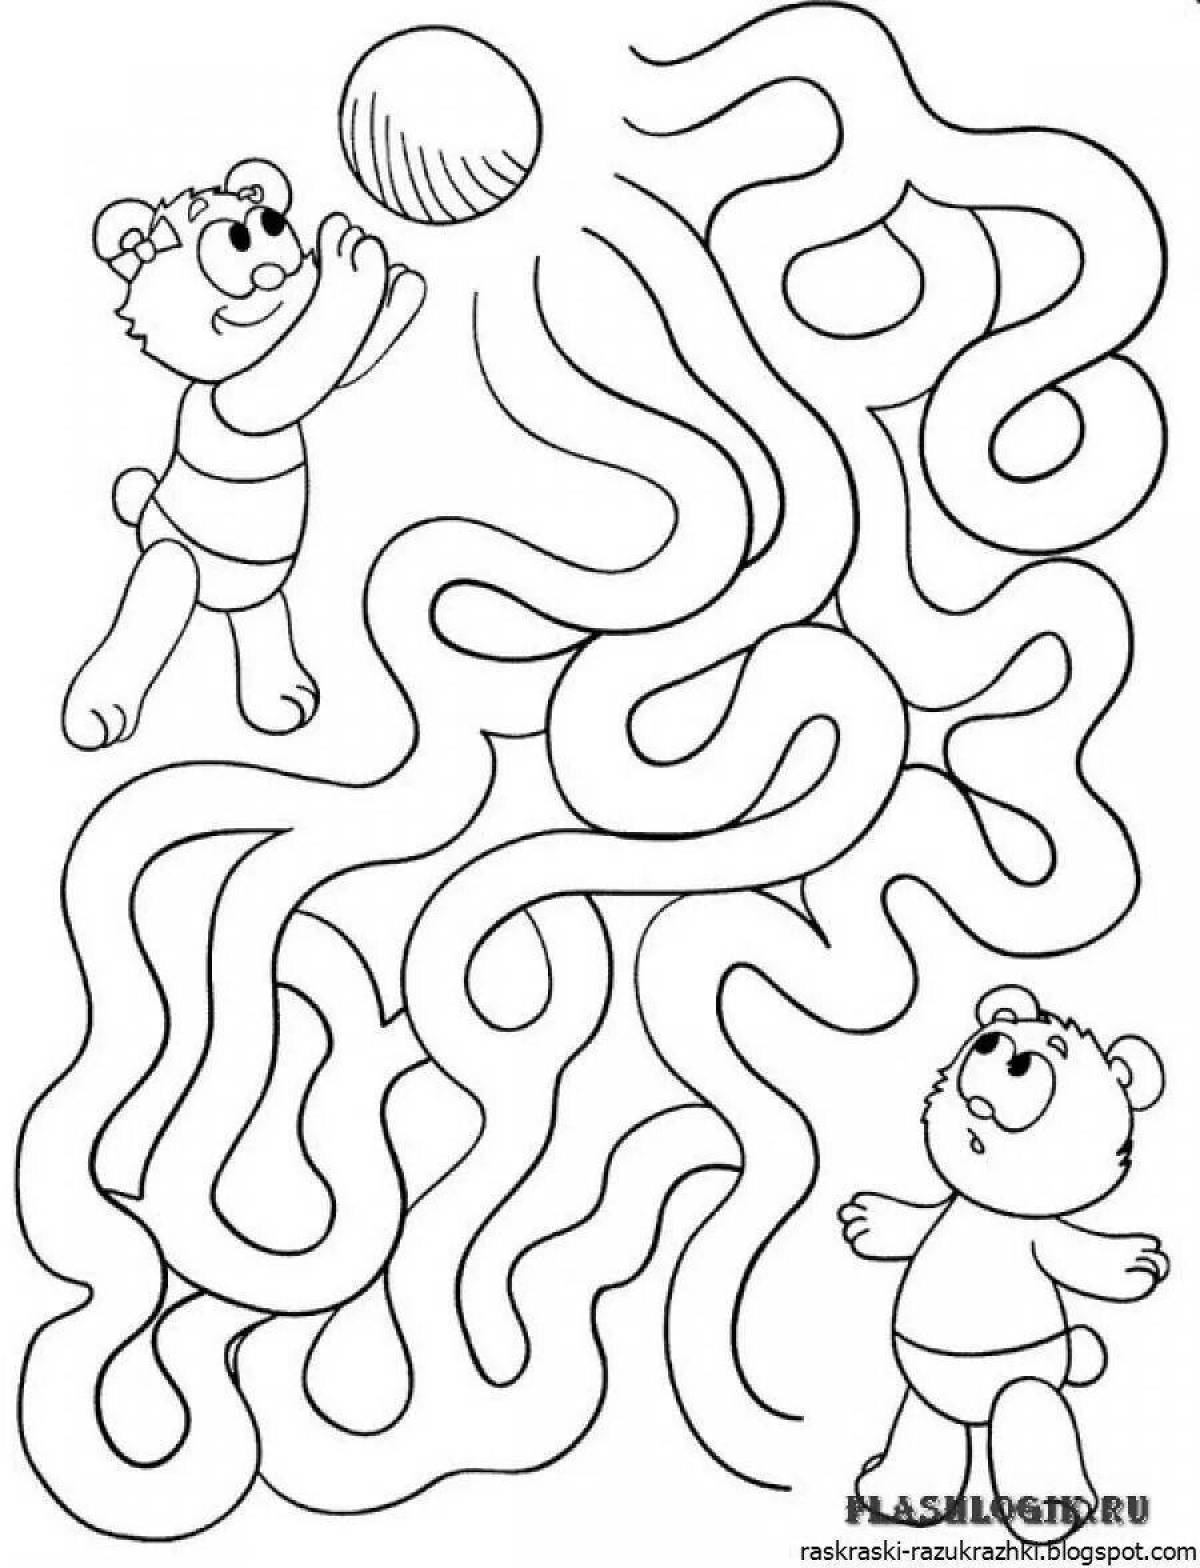 Educational coloring game for children 4-6 years old